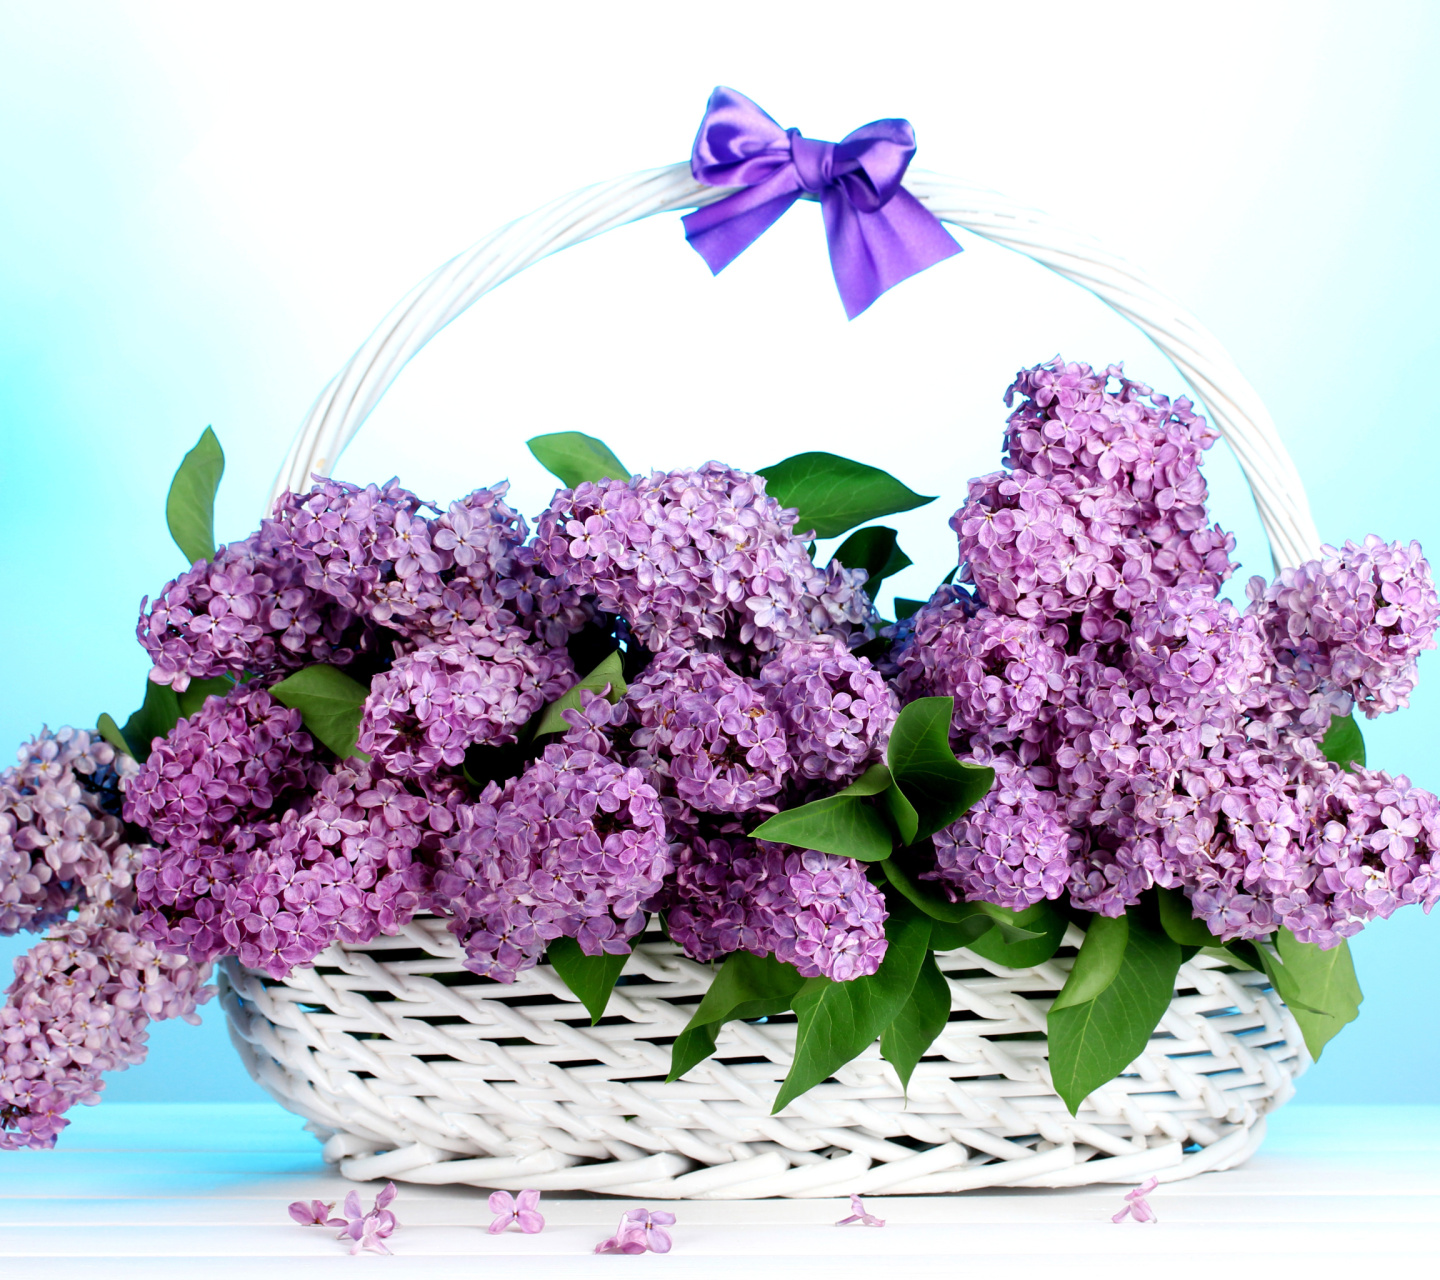 Das Baskets with lilac flowers Wallpaper 1440x1280